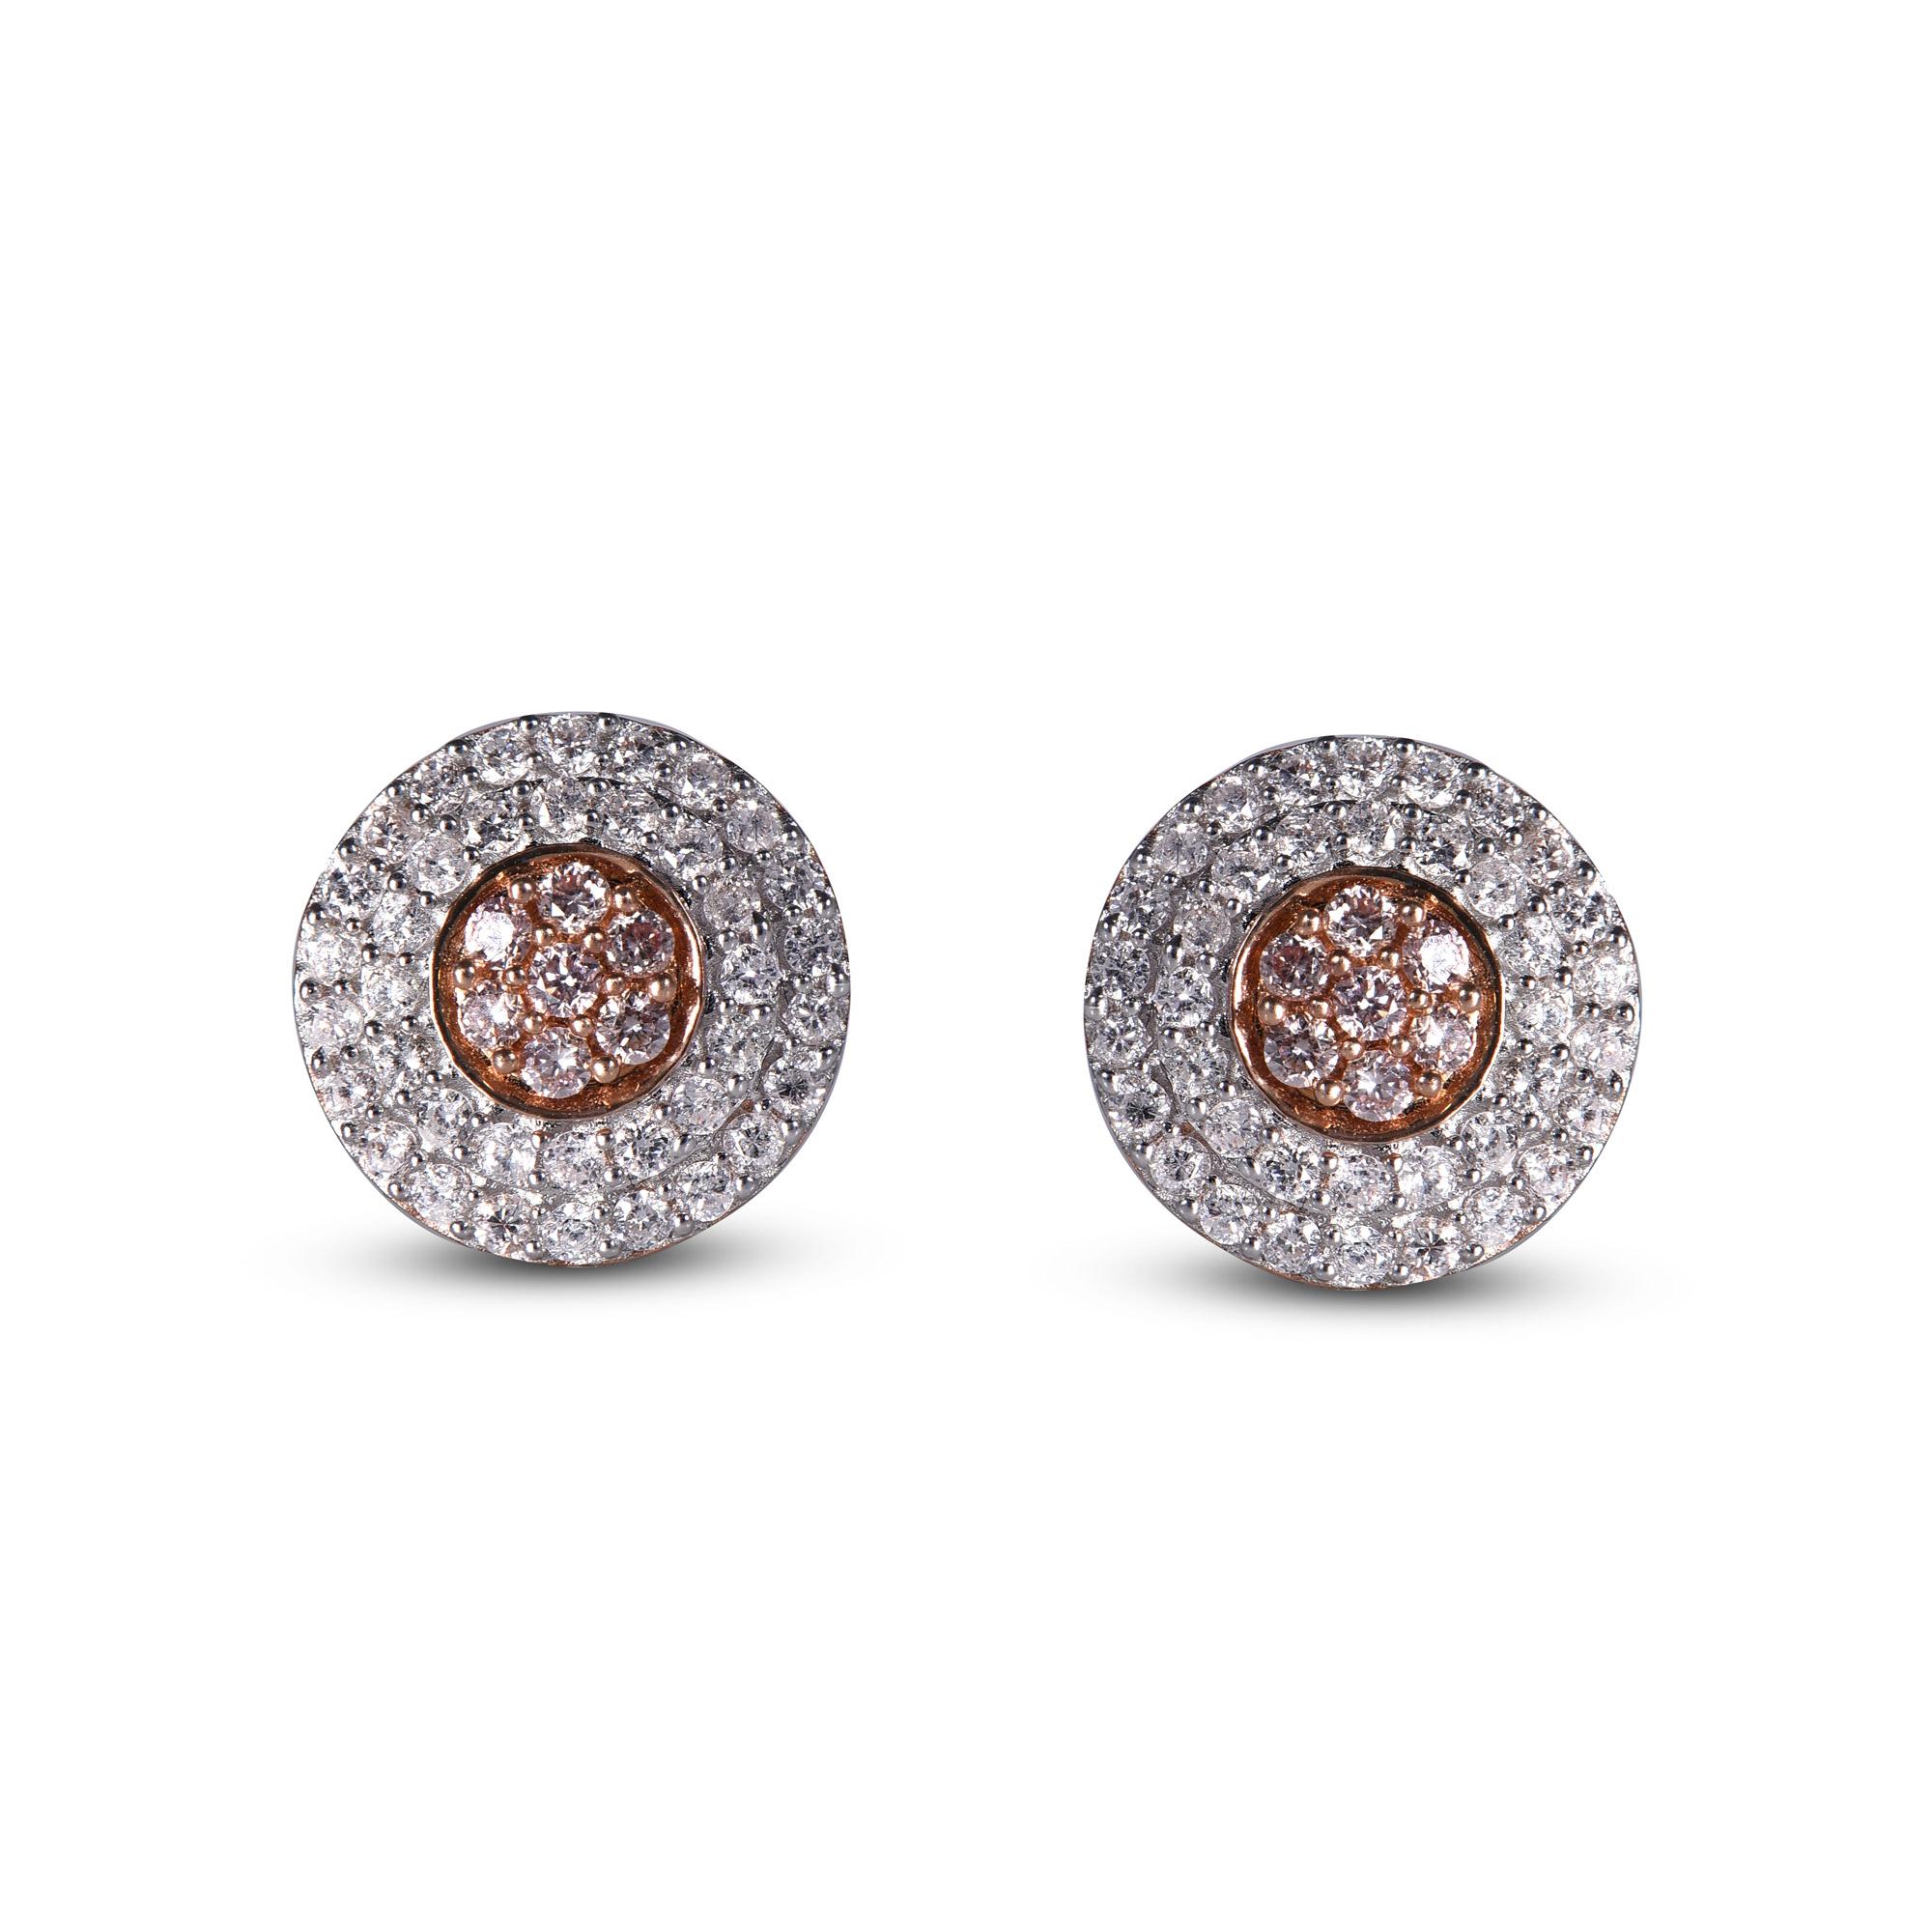 18 Karat Rose Gold double diamond frame Stud Earrings With 76 Round Brilliant and 14 Pink Diamonds timeless Cluster design Stud earrings have 0.75 Carats of Round Brilliant and pink diamond set in pave and prong setting, H-I color I1 clarity. These